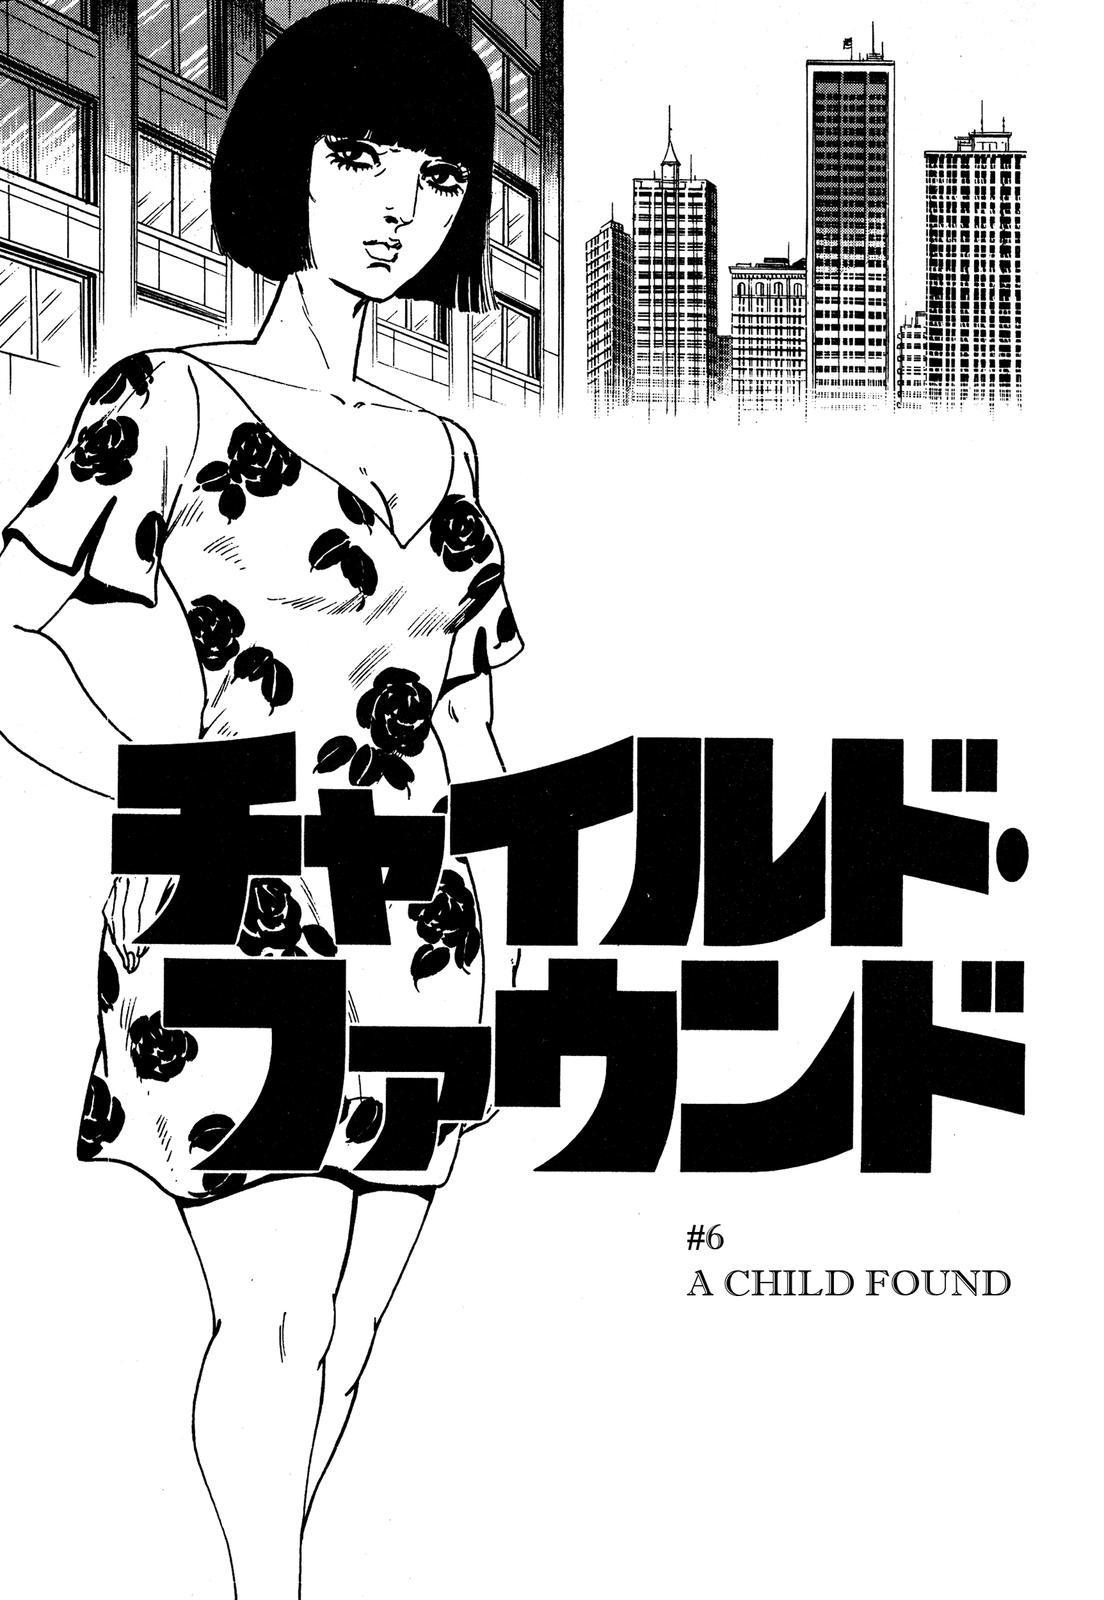 Doll: The Hotel Detective Vol. 3 Ch. 17 A Child Found